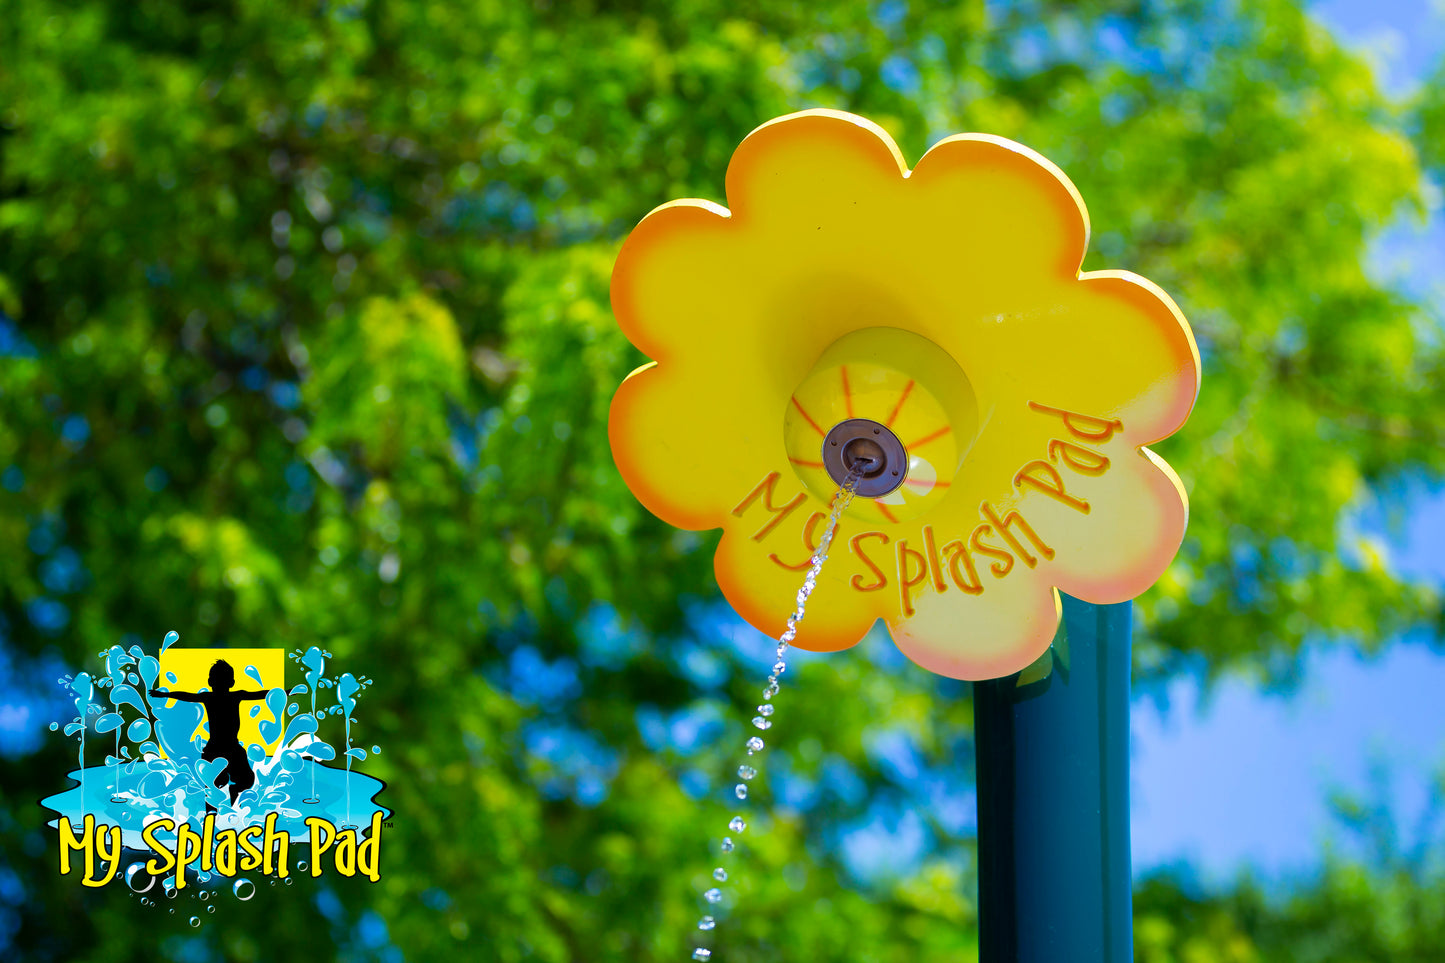 Flower Shower Portable Water Play Feature